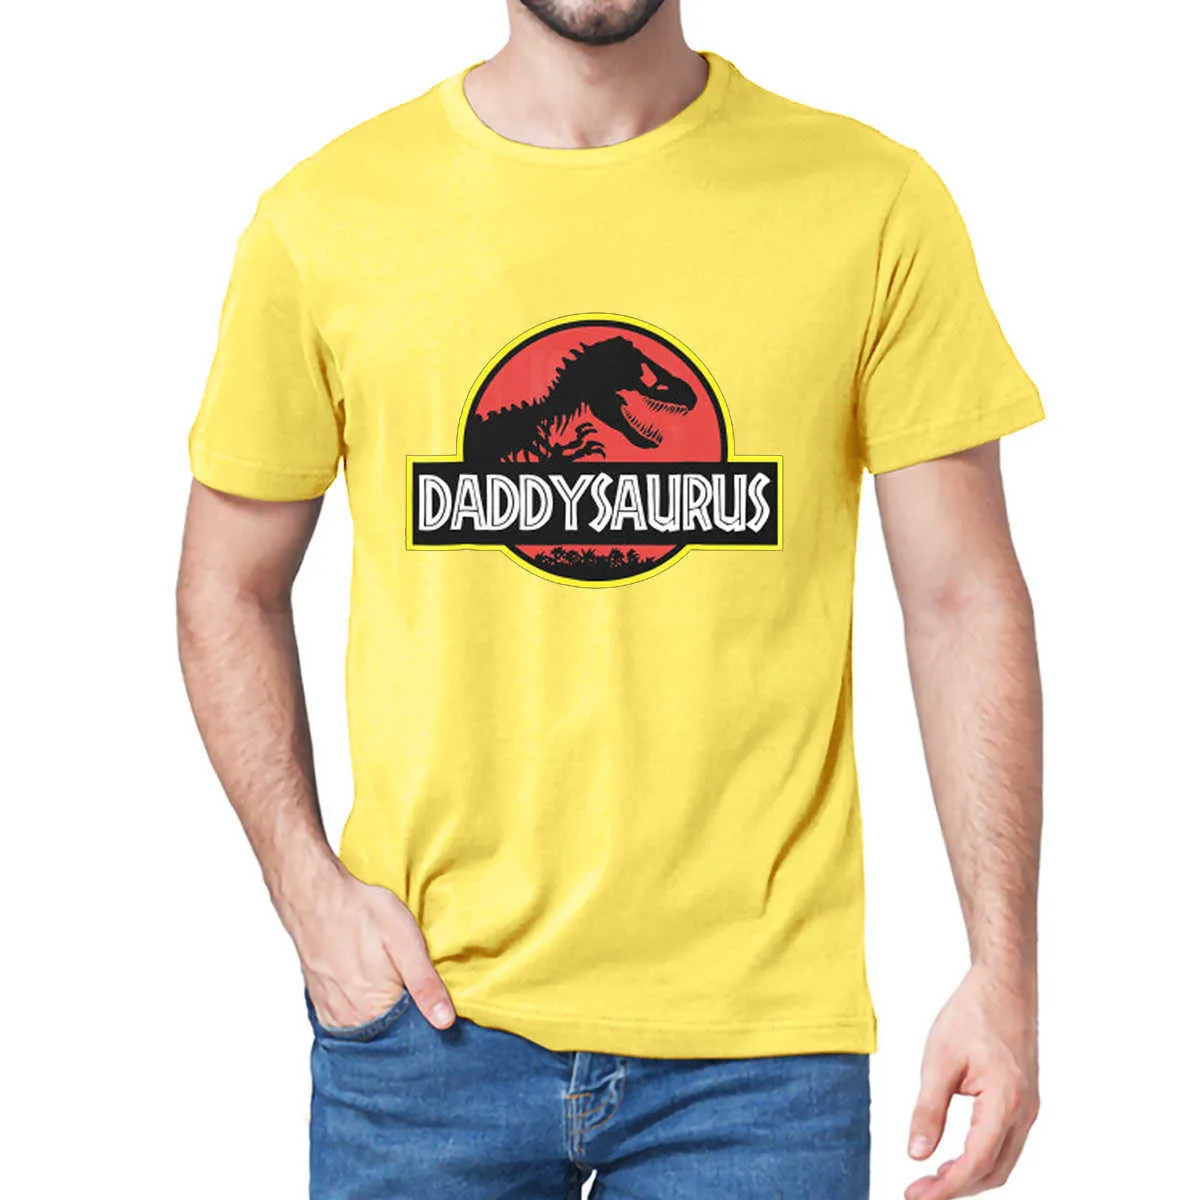 Dinosaur Dad Saurus Father's Day Gifts Funny Graphic Tee Family Birthday Party Tops Men's 100% Cotton T-Shirt 210629